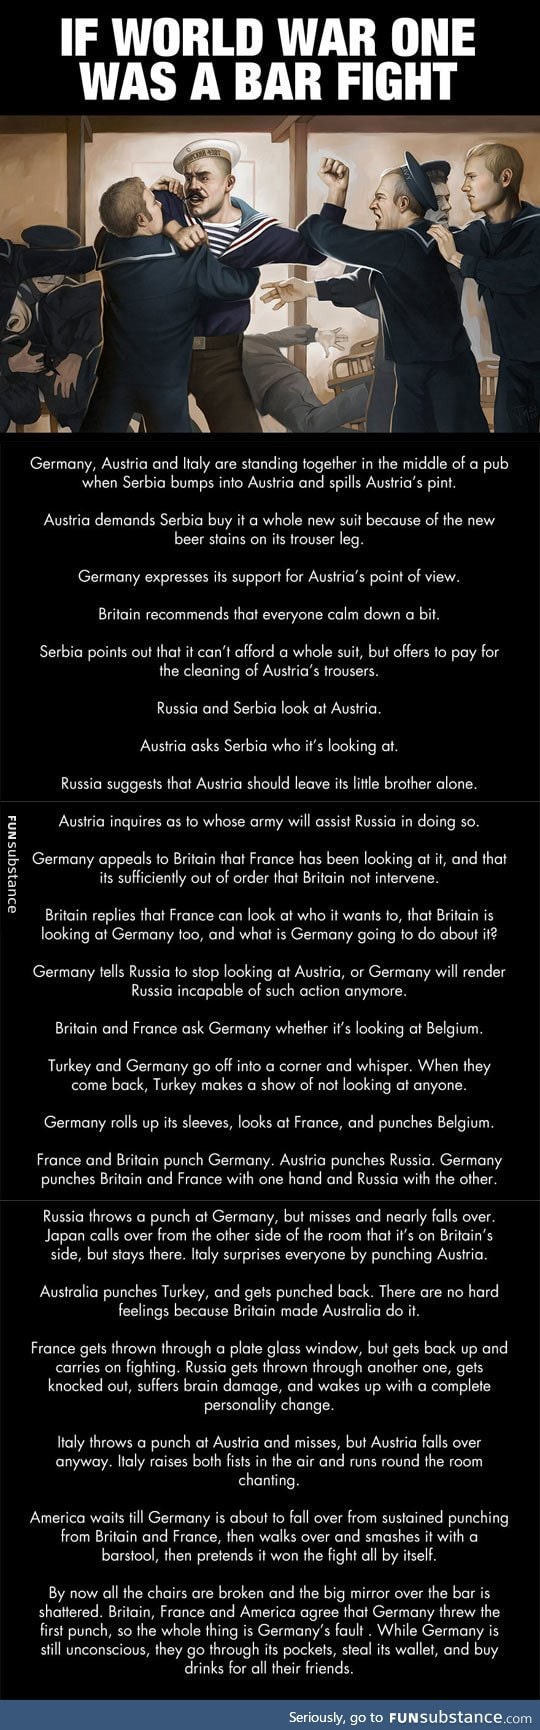 If WWI was actually a bar fight